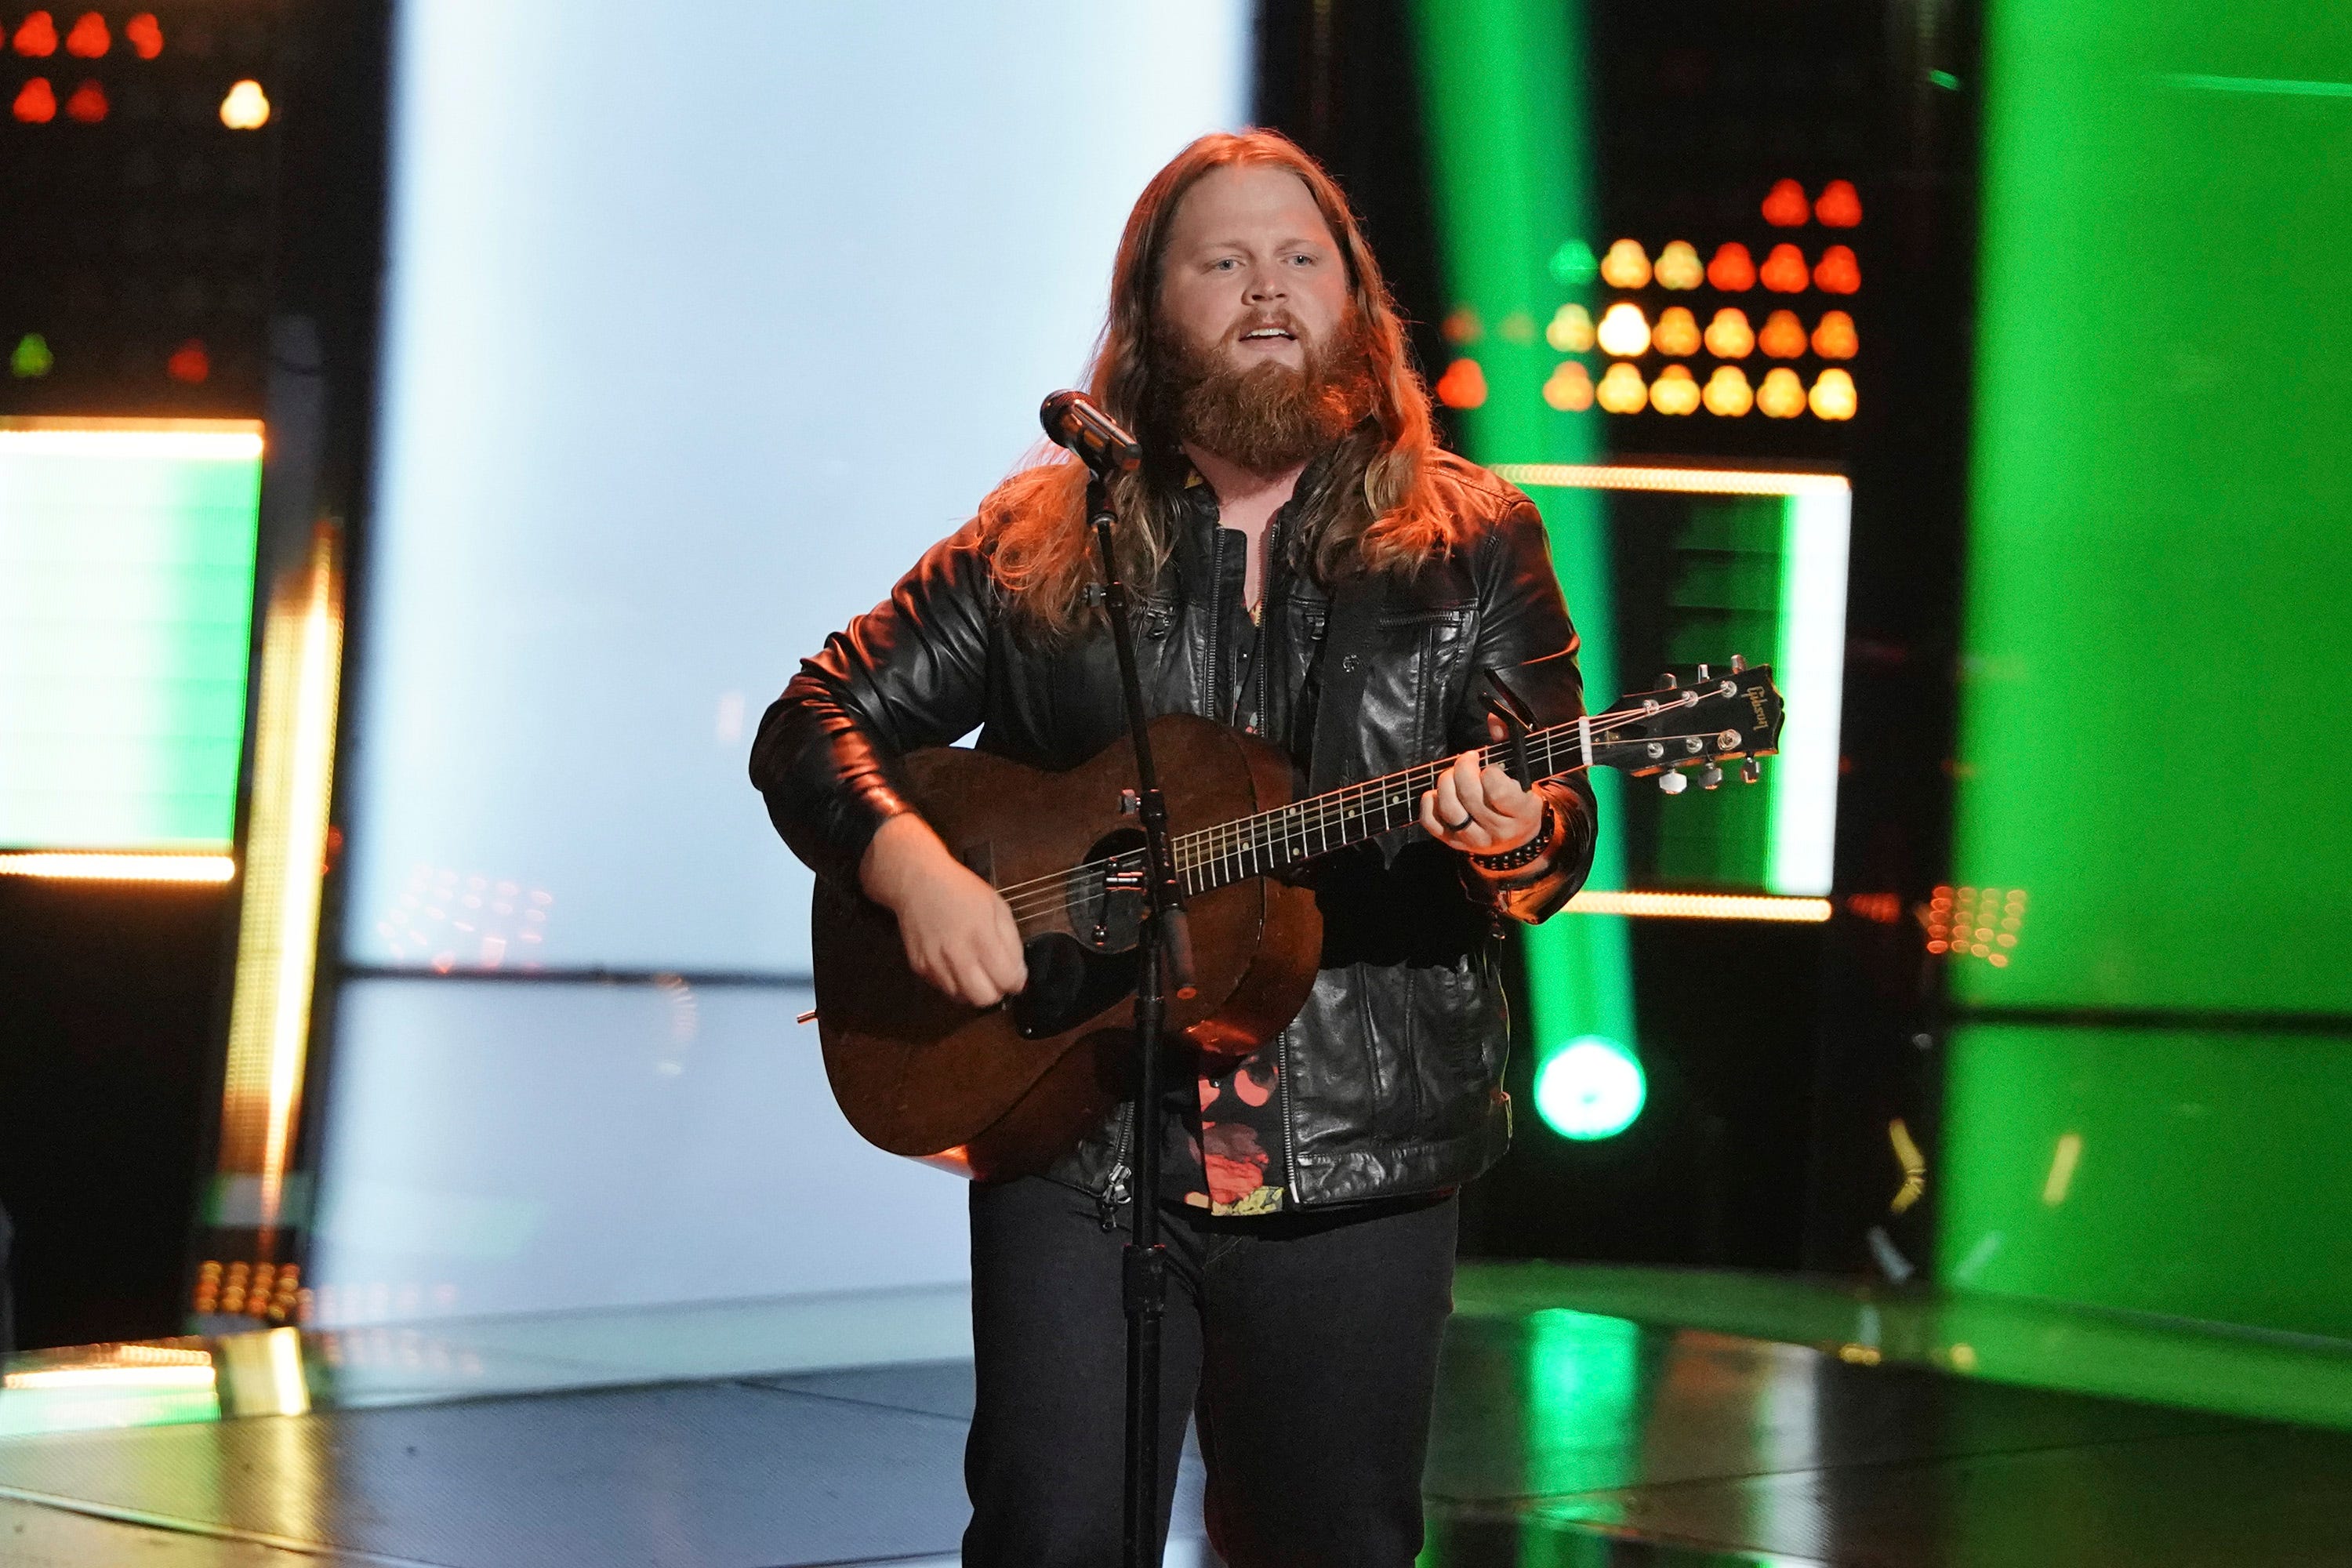 Wisconsin country rocker Chris Kroeze on how 'The Voice' changed his life